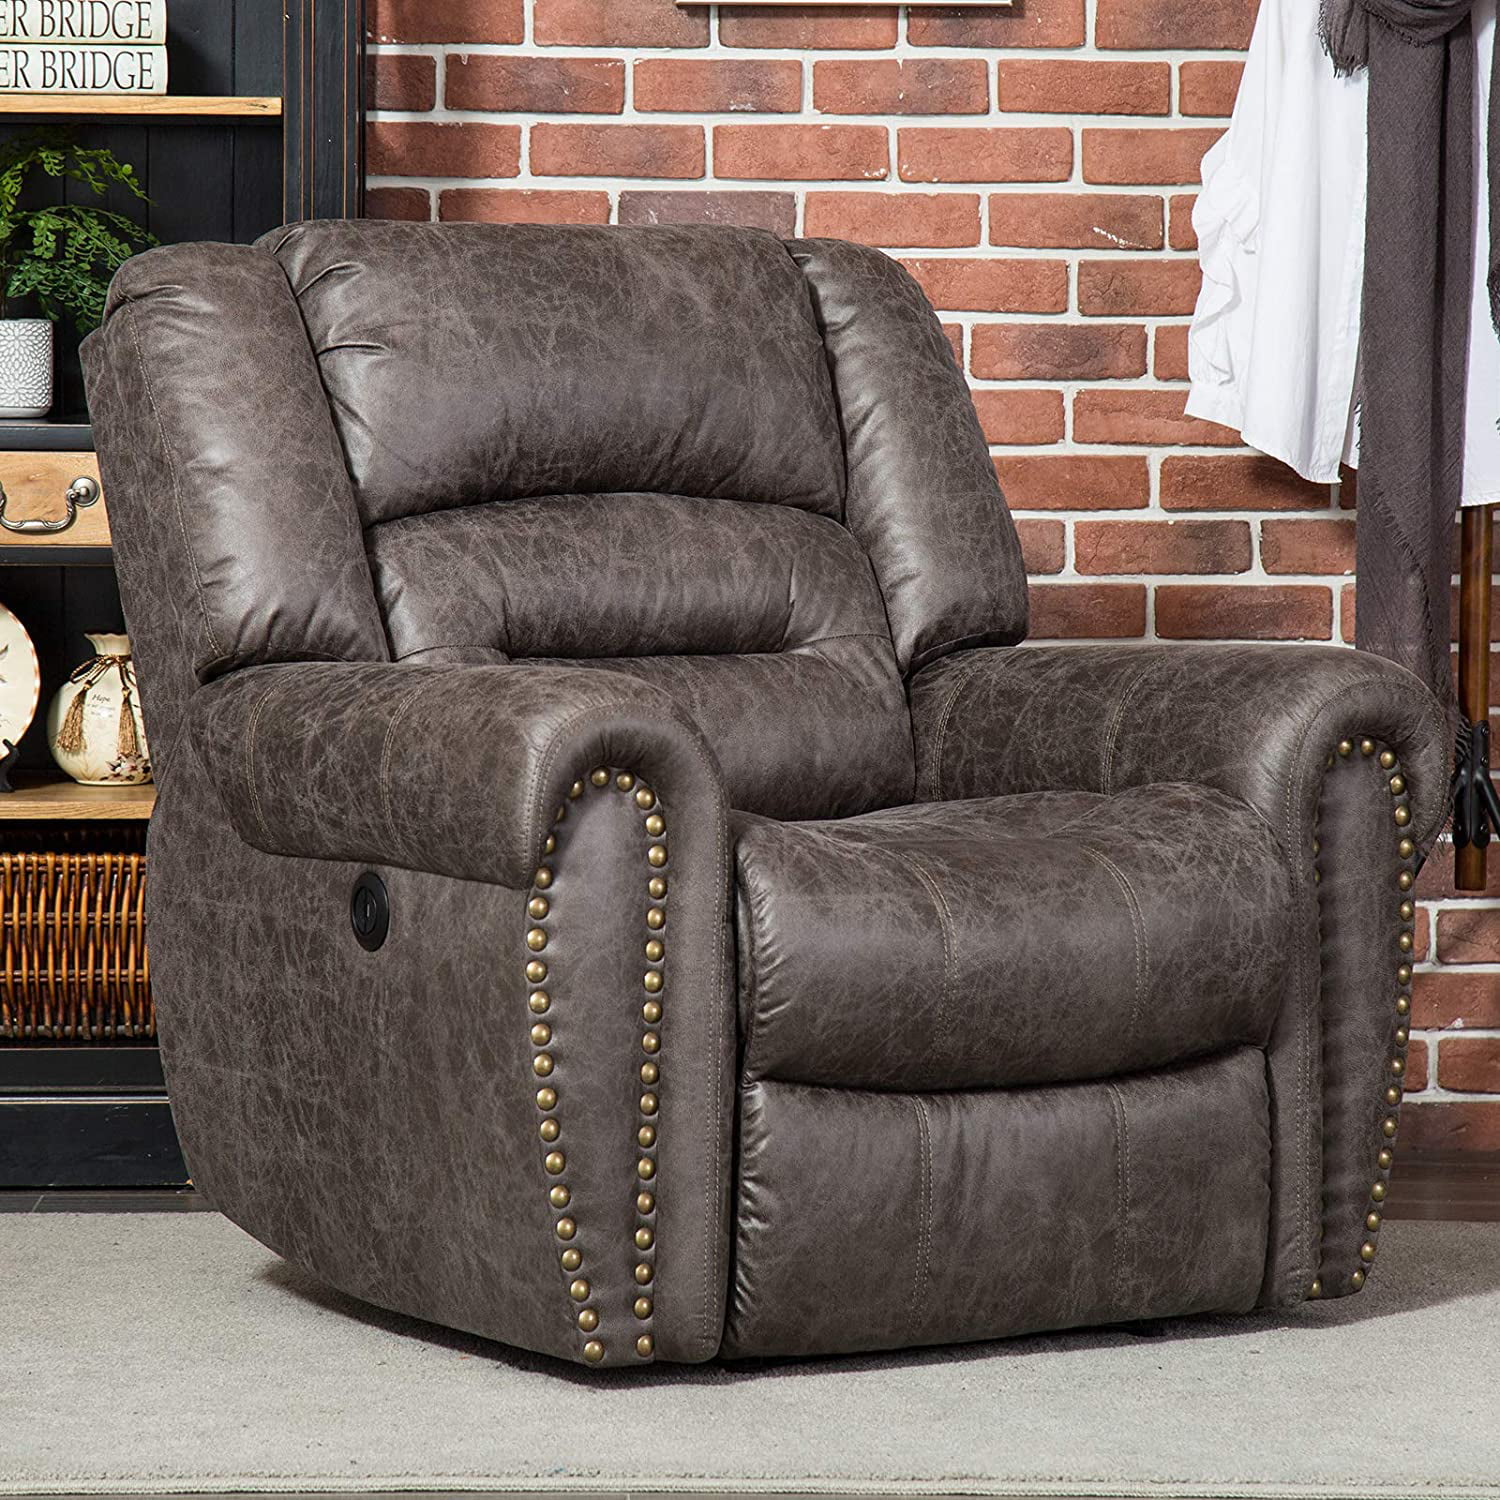 Classic Bonded Leather Upholstered Rocker Recliner Living Room Chair in Black 